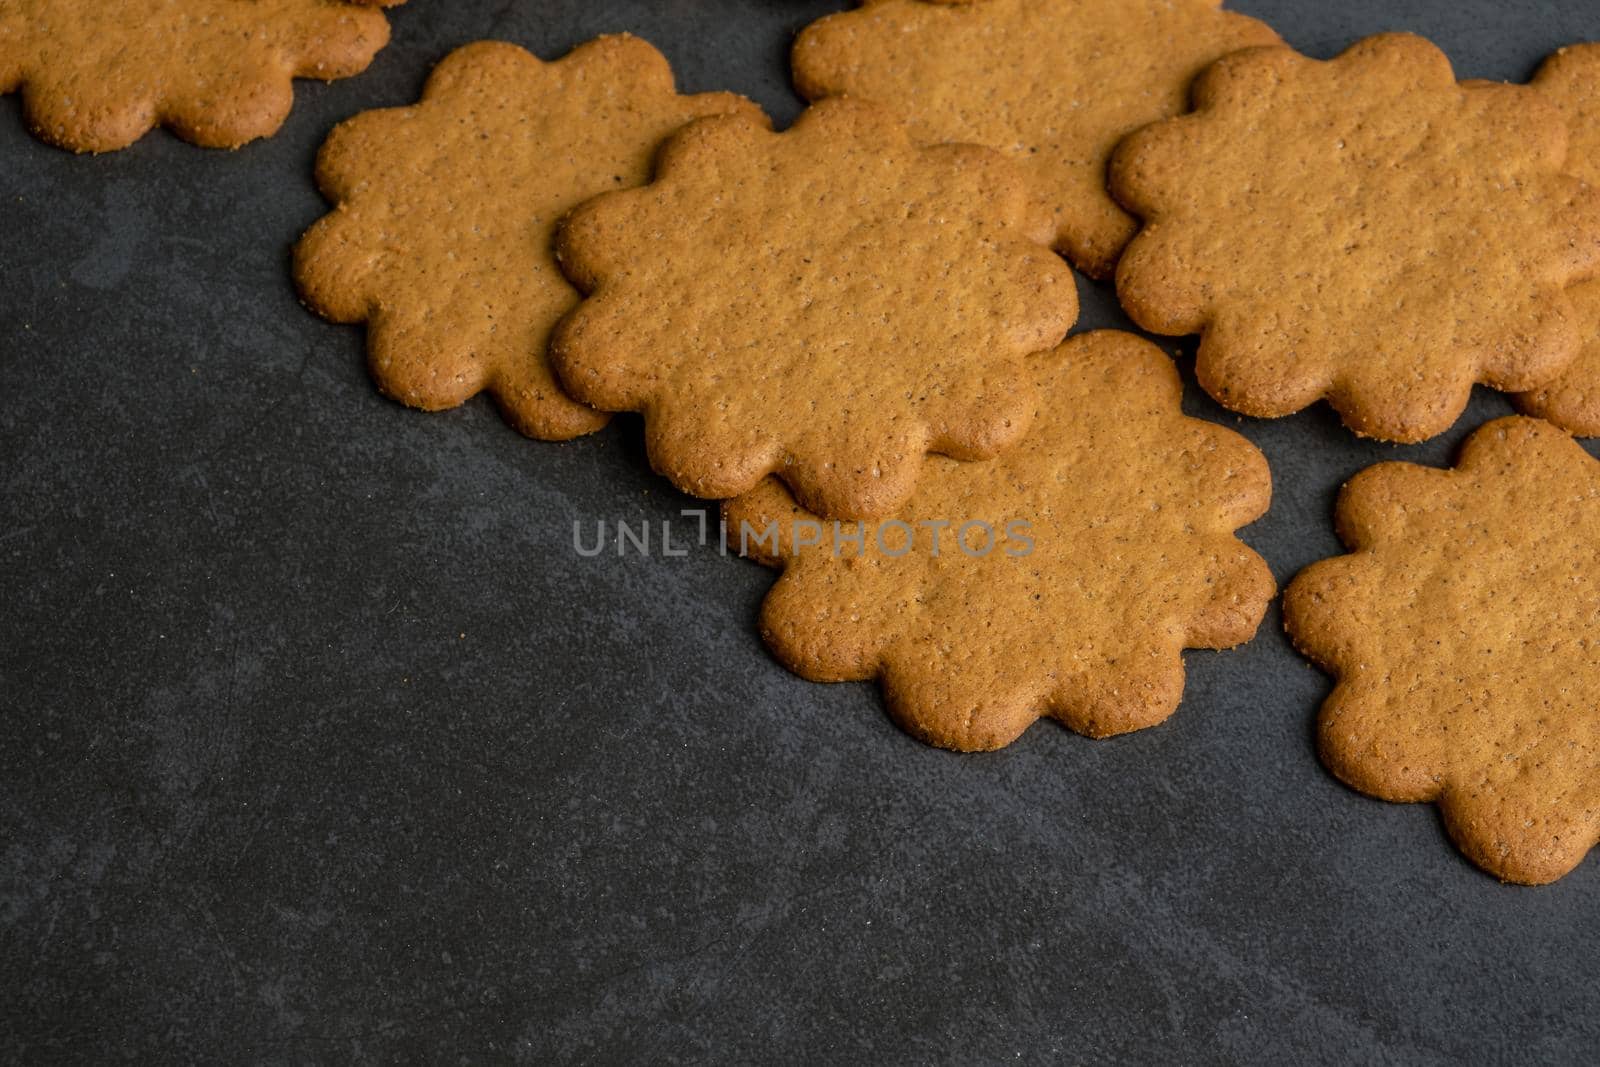 Fresh ginger biscuits piled on dark stone background